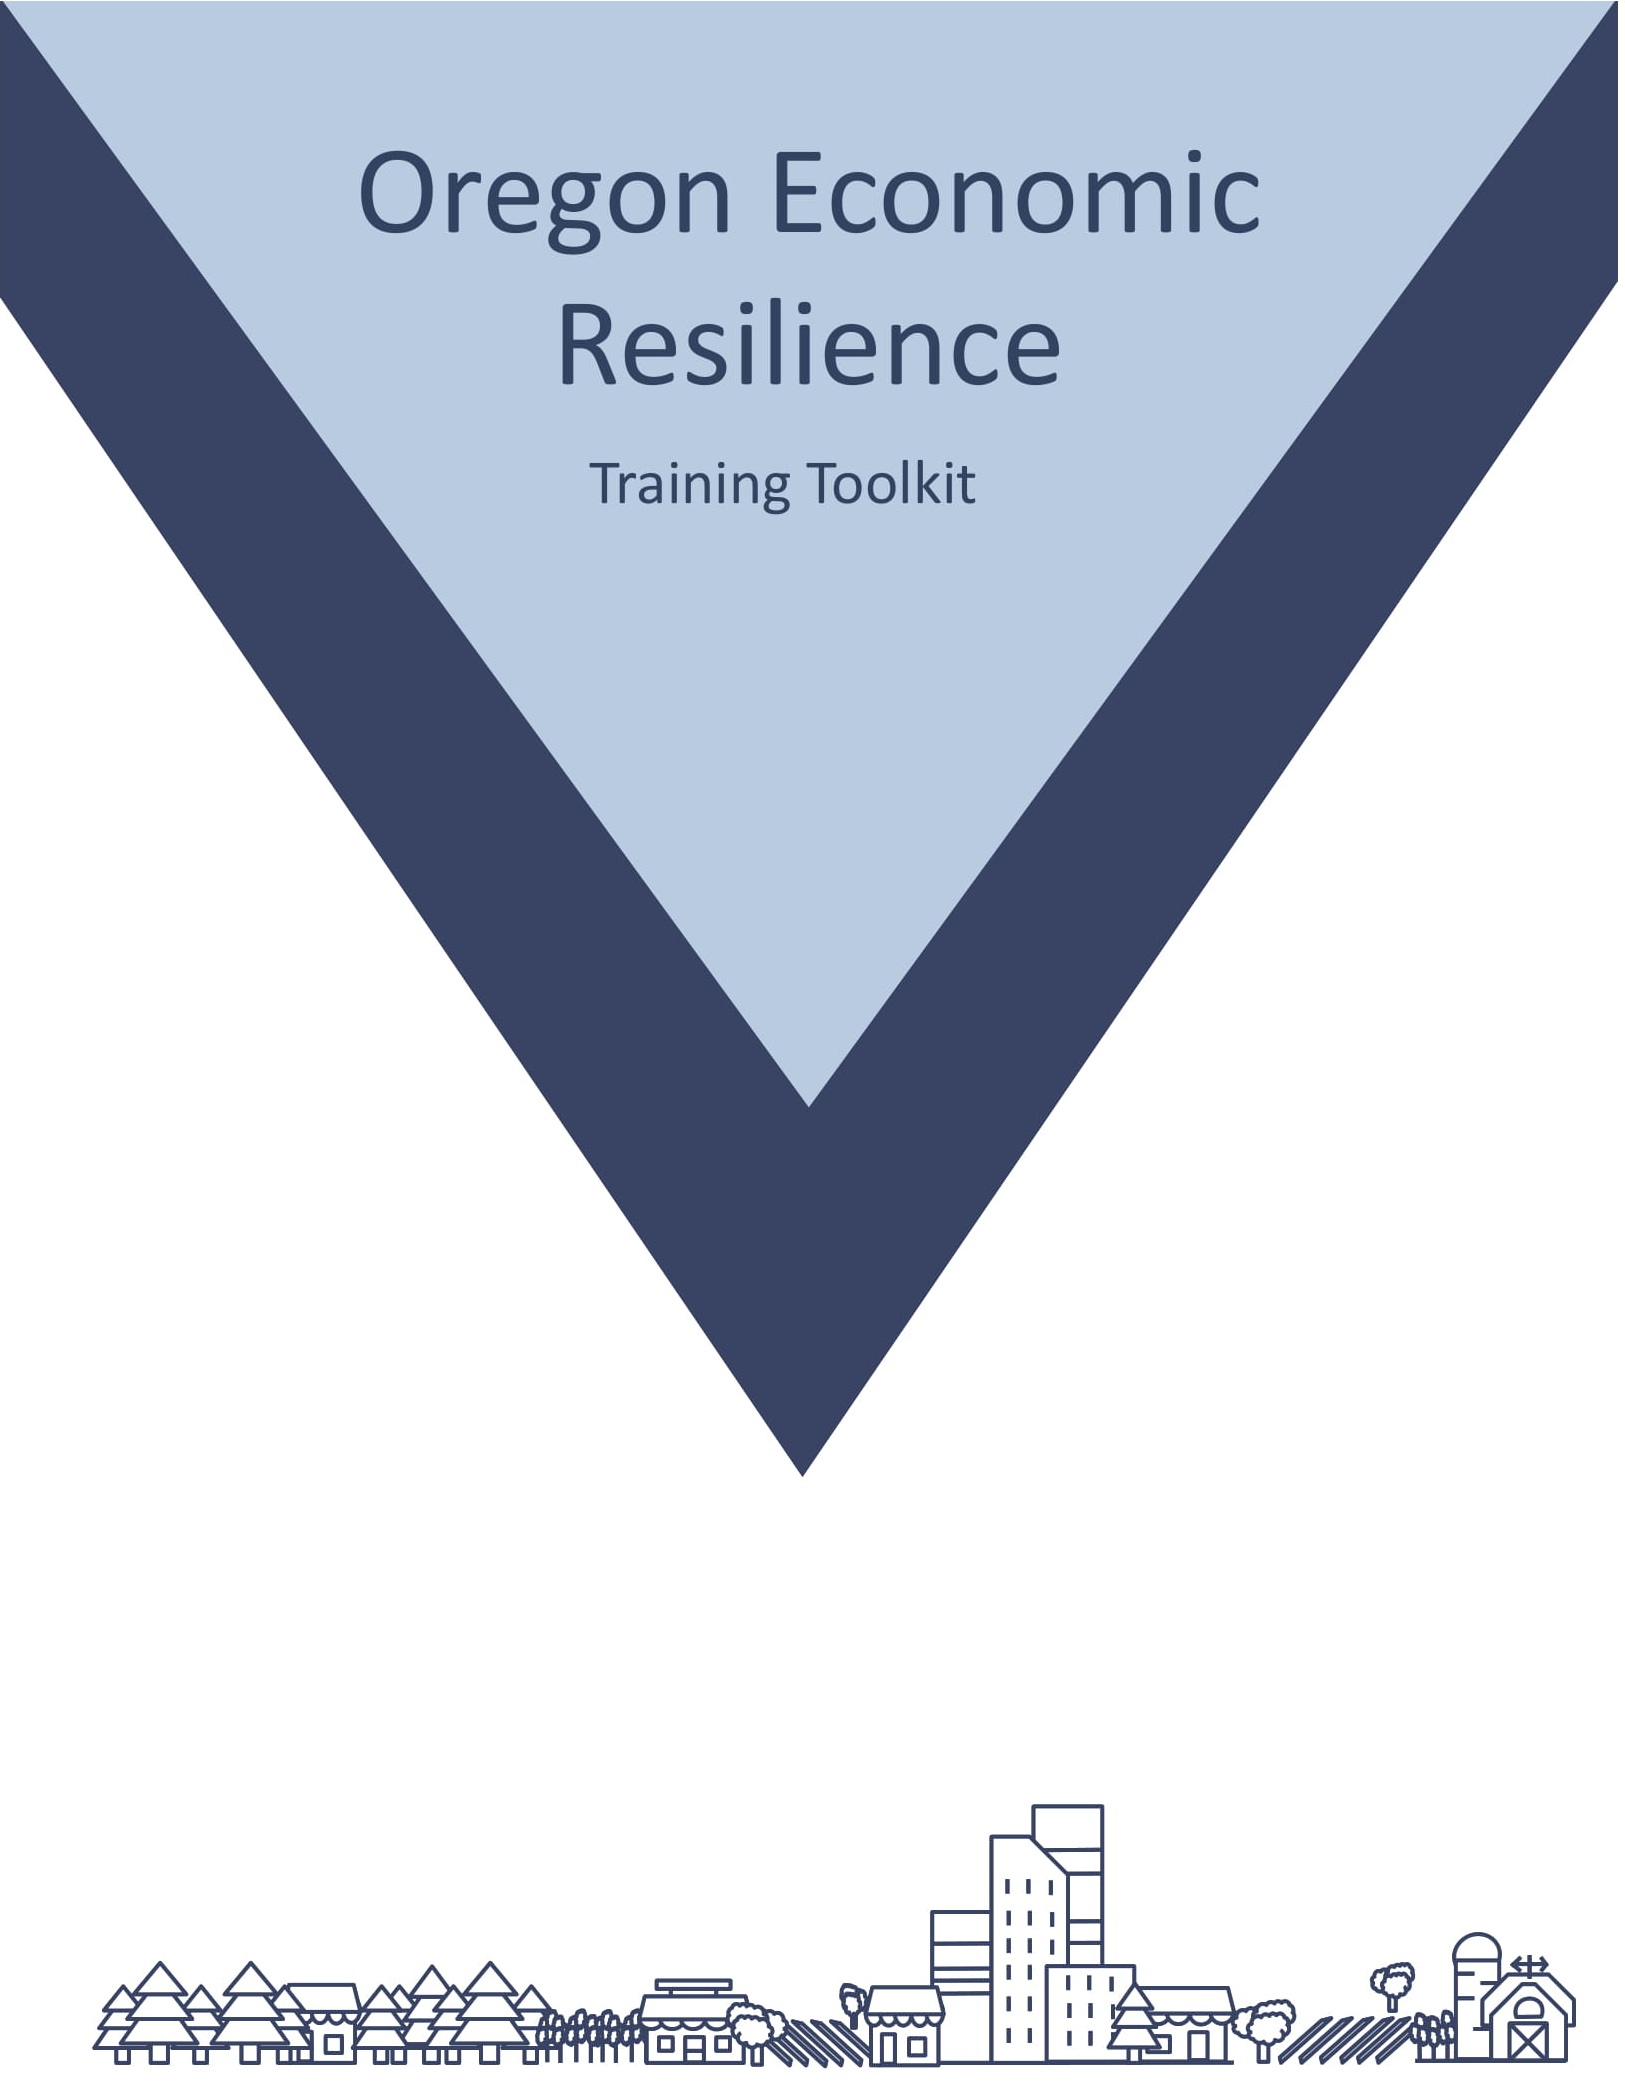  Cover for the Oregon Economic Resilience training toolkit, a draft deliverable incorporating a one-year project assessing statewide economic resilience. The project used the 2017 eclipse as a proxy event to determine the State’s readiness for an eco